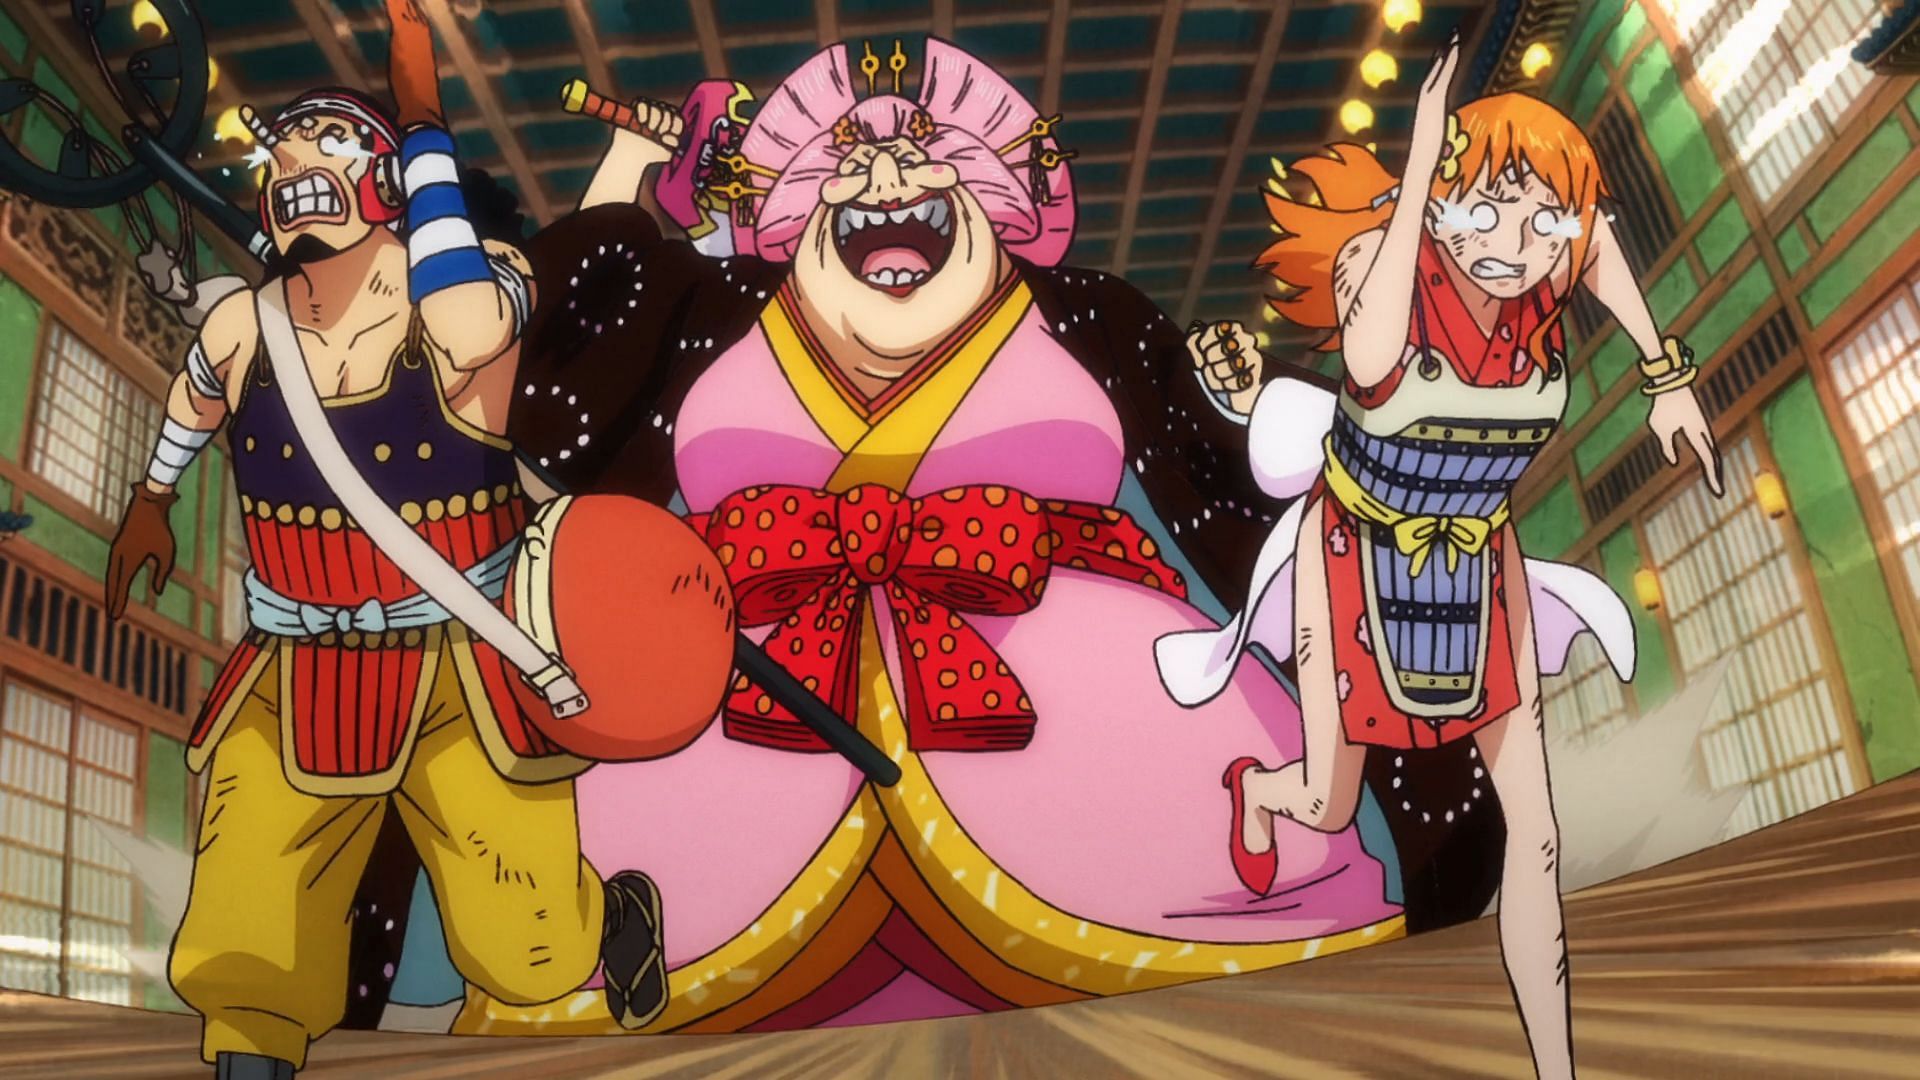 Nami and Usopp running from Big Mom in One Piece episode 1034 (Image via Toei Animation)